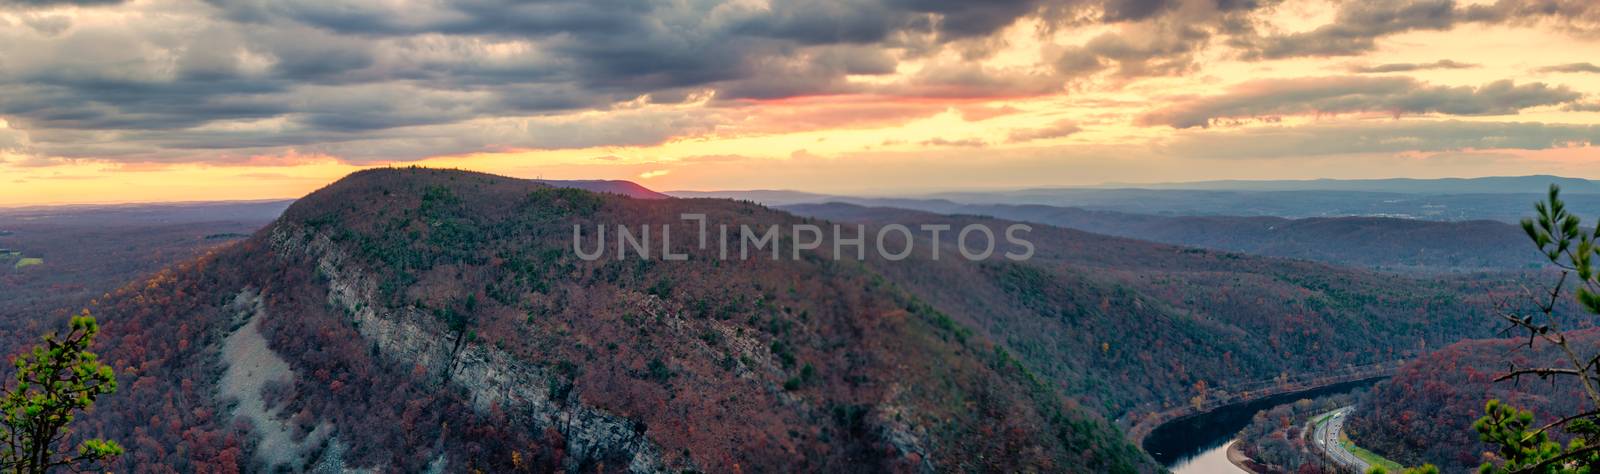 A Panoramic View of the Sunset From Atop Mount Tammany at the De by bju12290